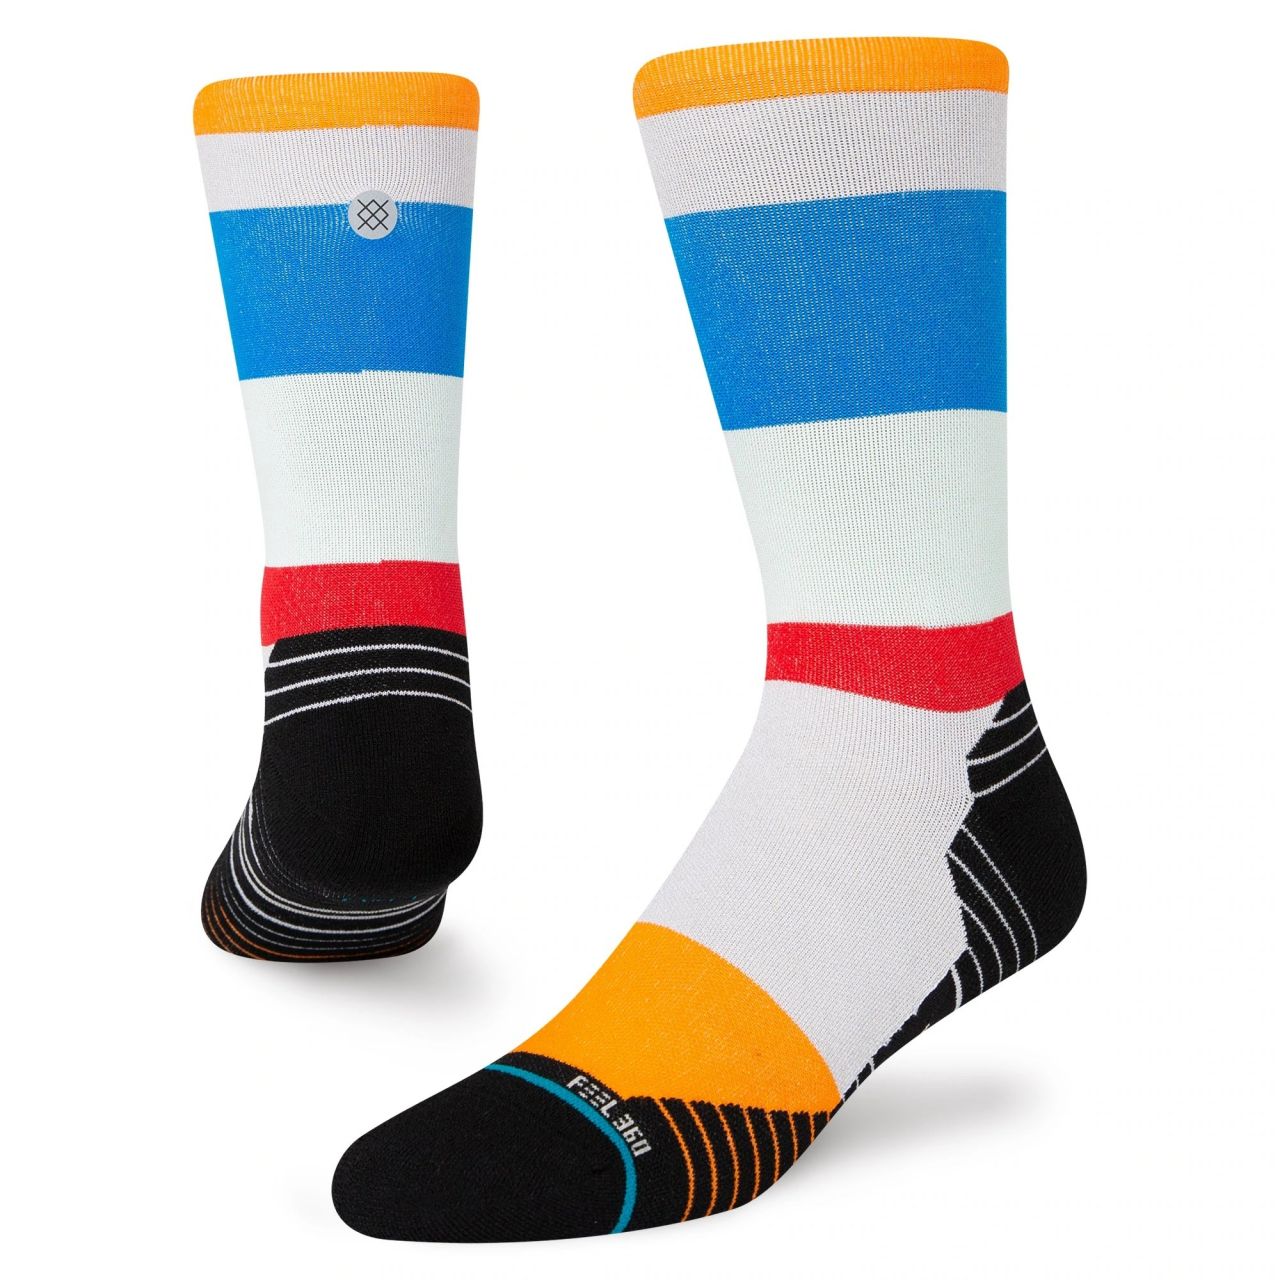 STANCE CHAUSSETTES RATE GREY Chaussettes de running